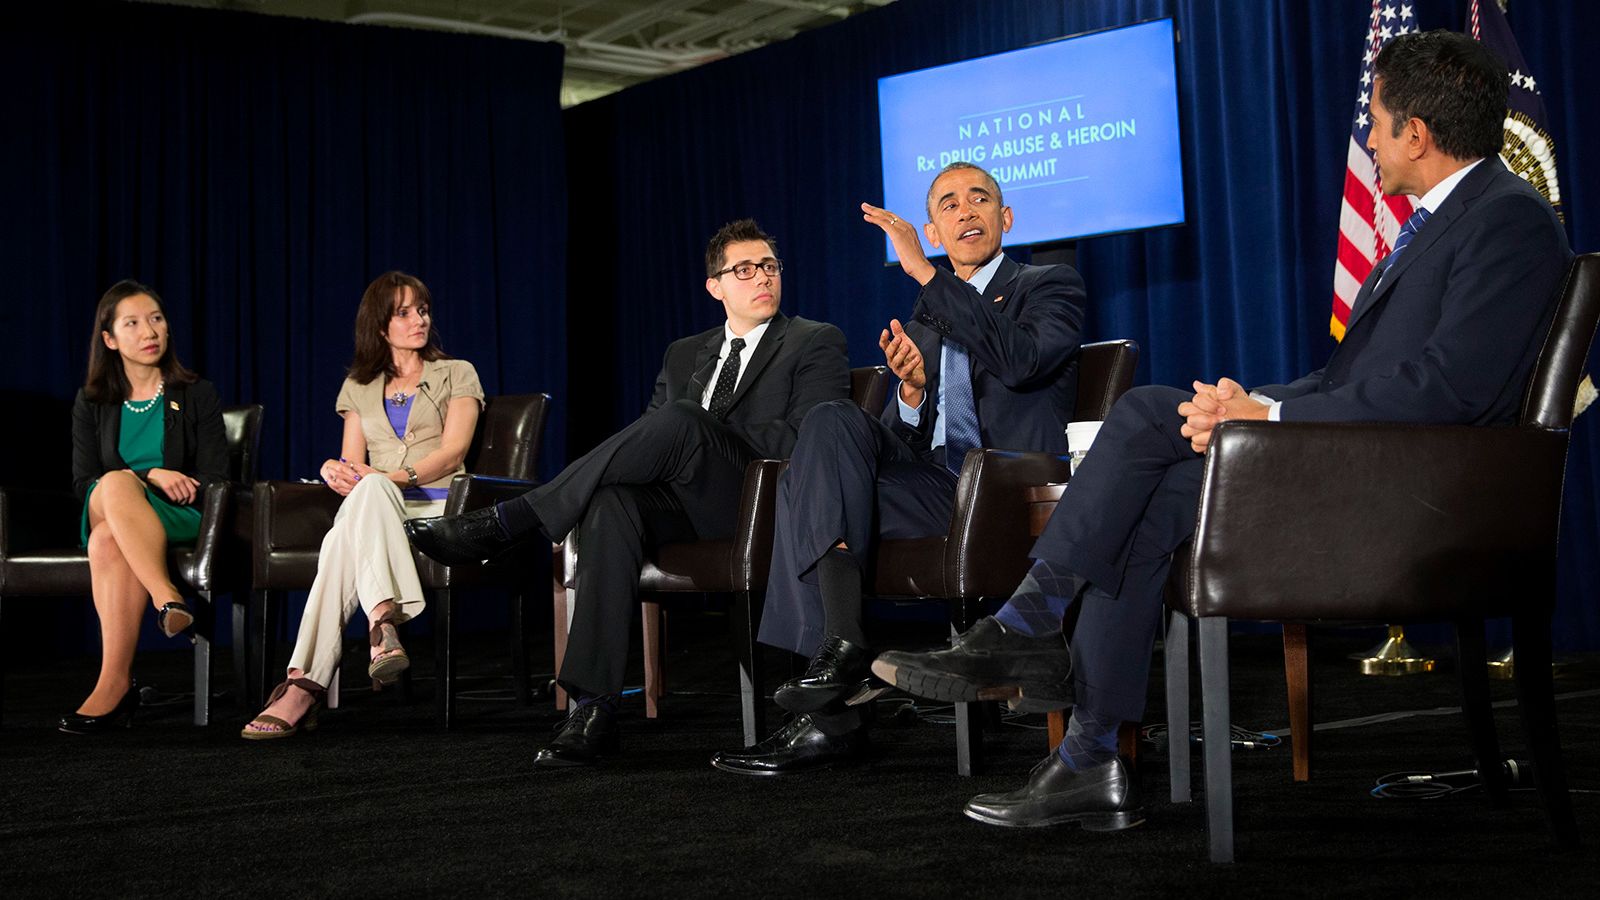 Leana Wen speaks with former President Barack Obama, Sanjay Gupta and others during the National Rx Drug Abuse and Heroin summit in Atlanta, March 29, 2016.